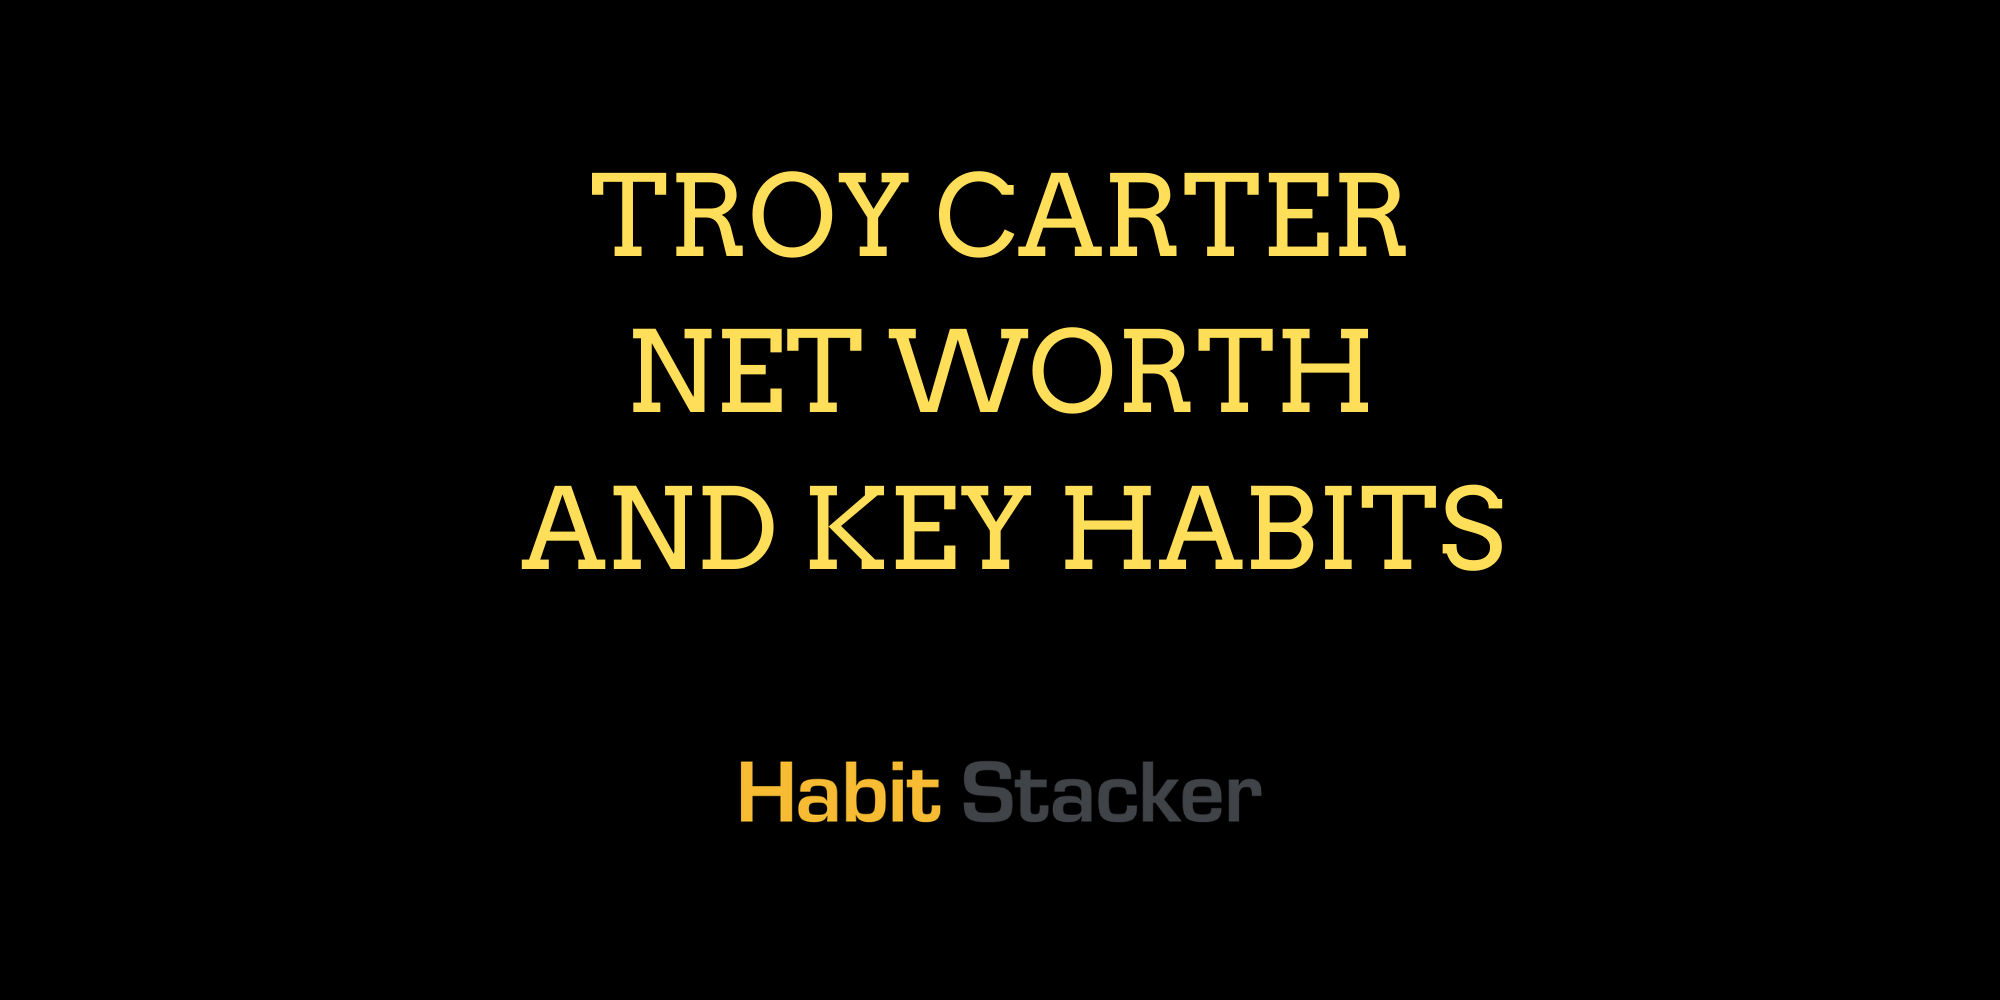 Troy Carter Net Worth and Key Habits